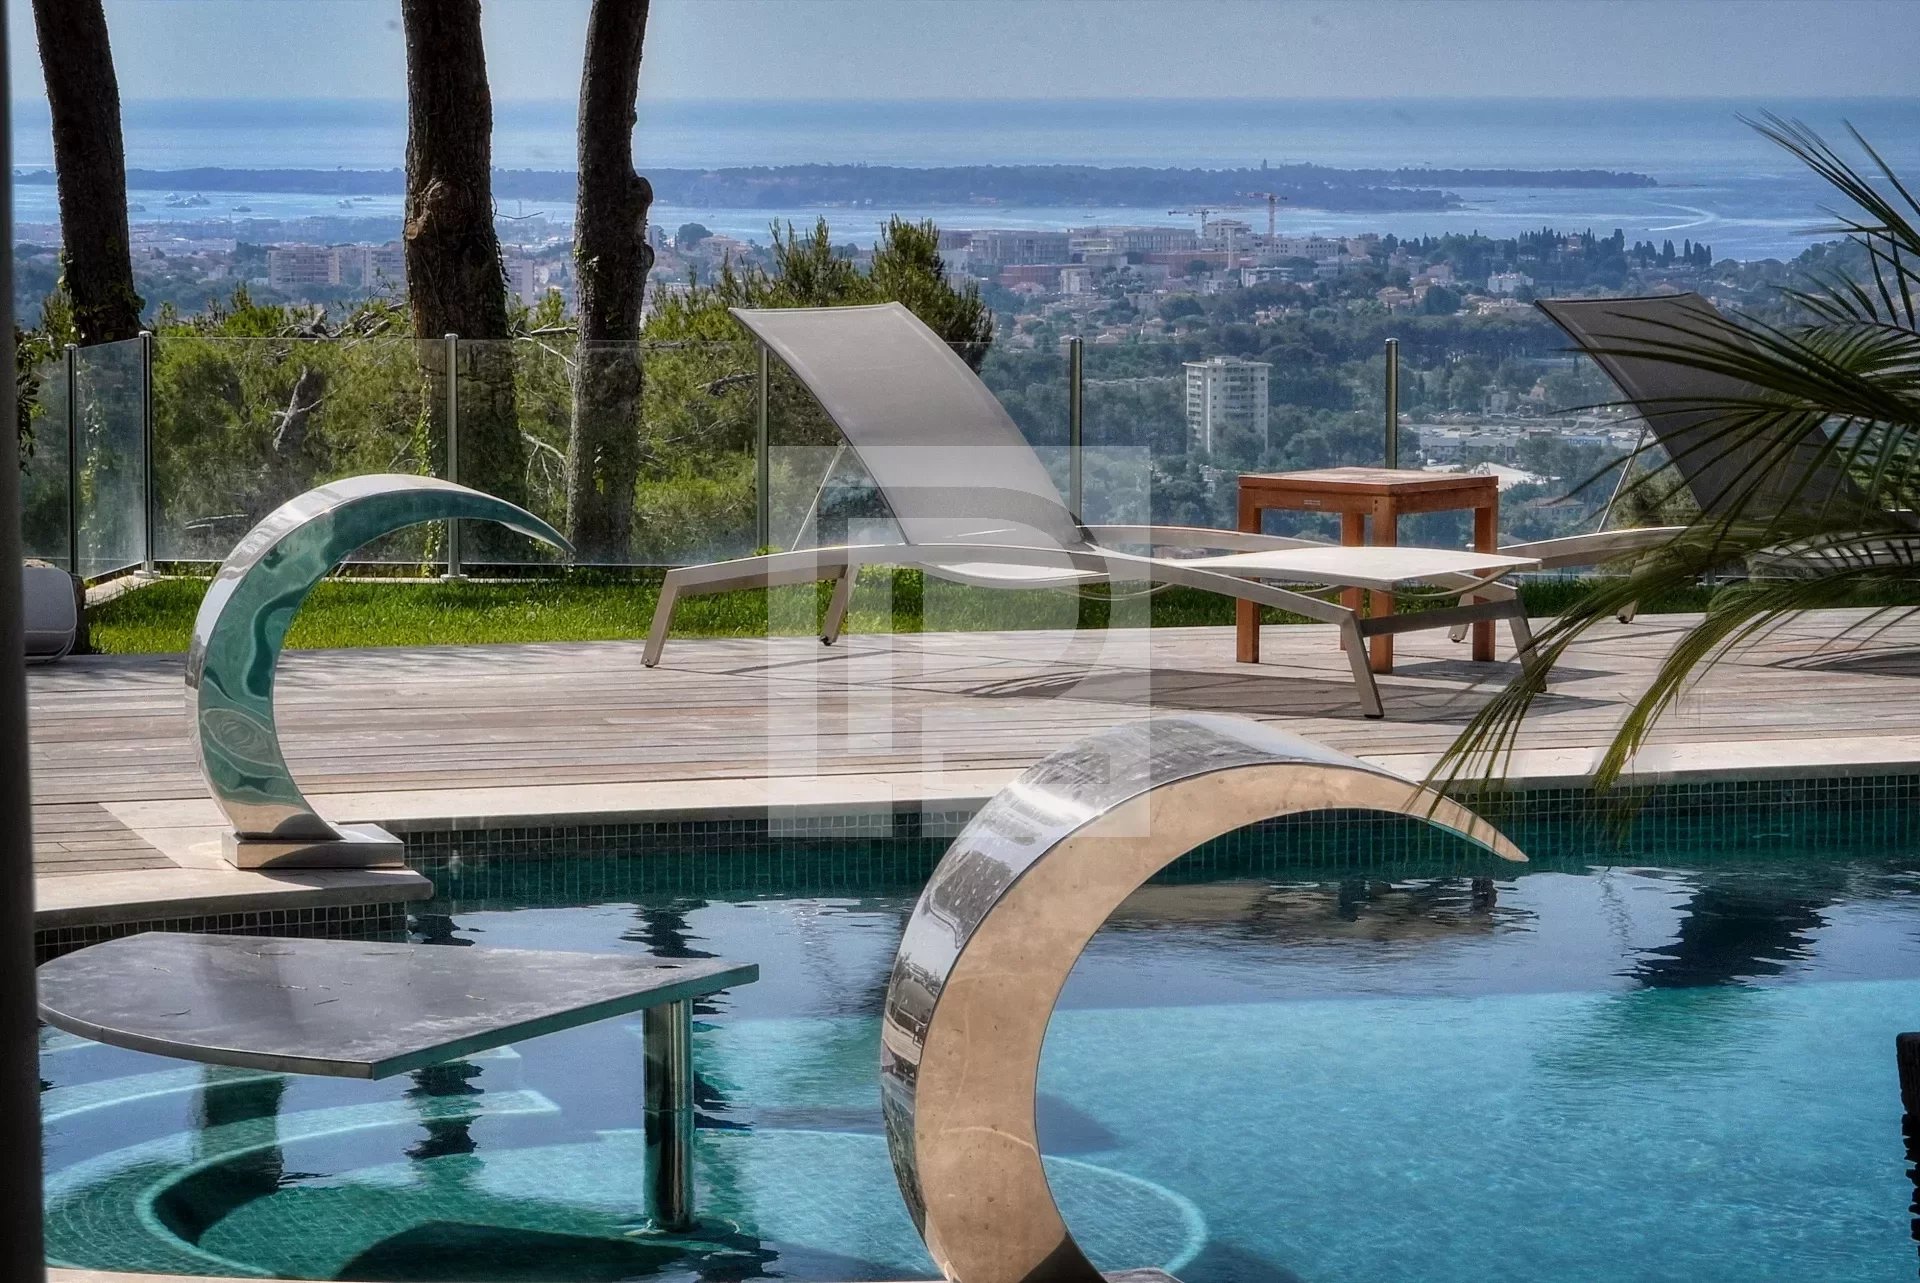 One of the most beautiful properties in Mougins